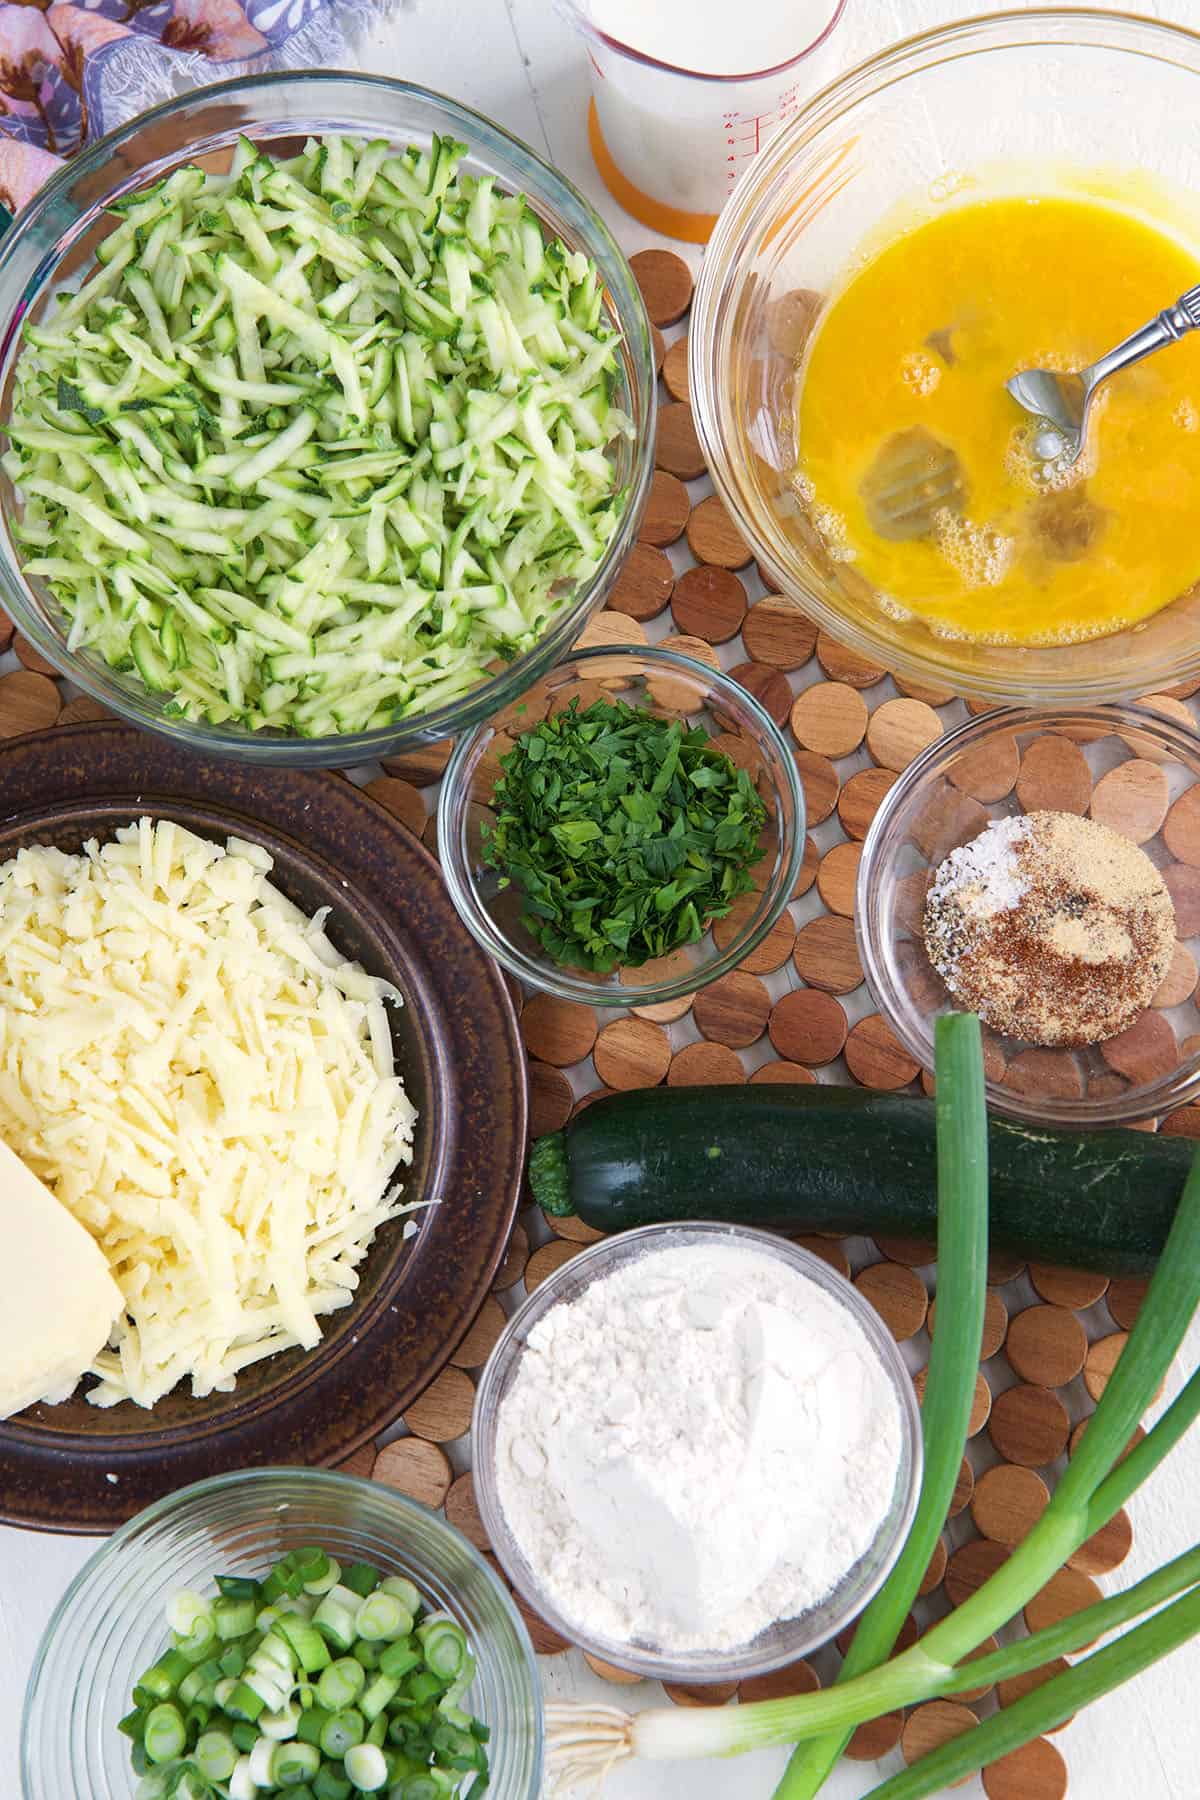 The ingredients for zucchini fritters are placed on a wooden surface.